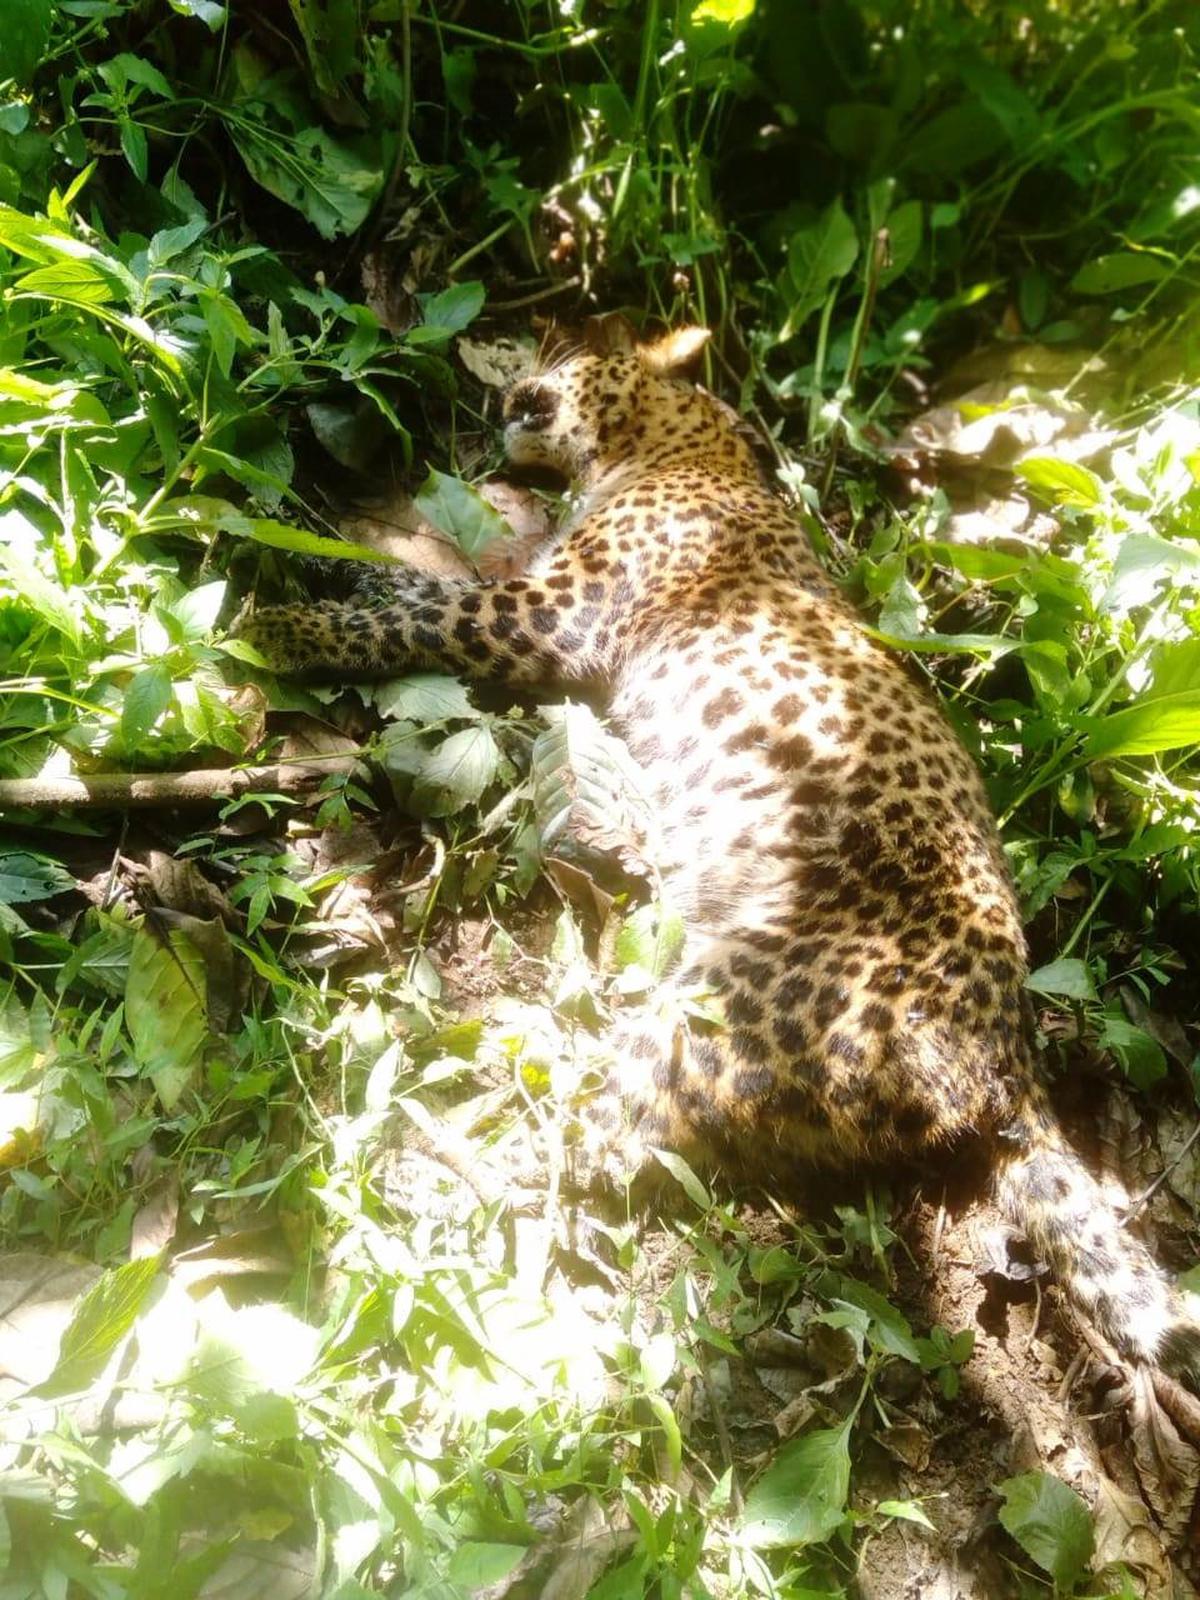 Lungs, liver of leopard found dead in Idukki were infected: autopsy report